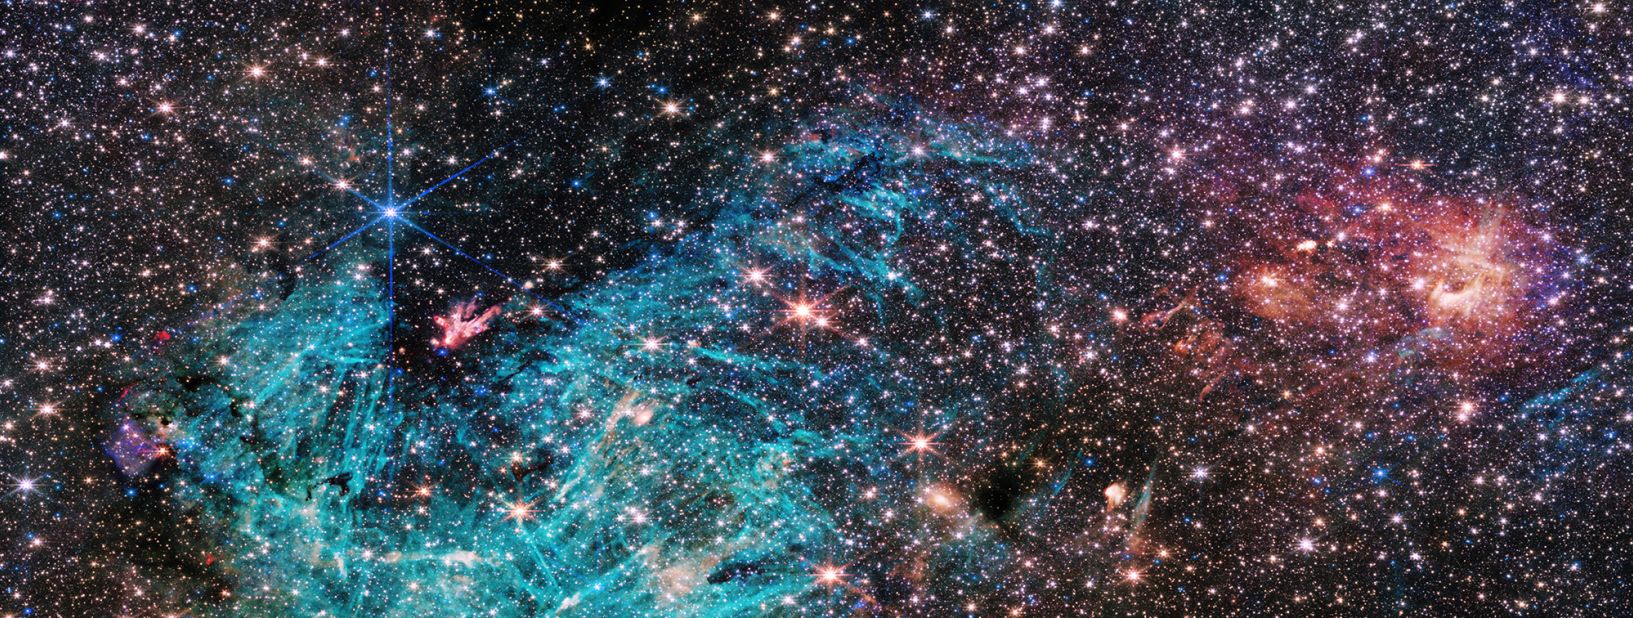 There are approximately 500,000 stars in this image of the Sagittarius C region of the Milky Way. The bright cyan area contains emissions from ionized hydrogen.